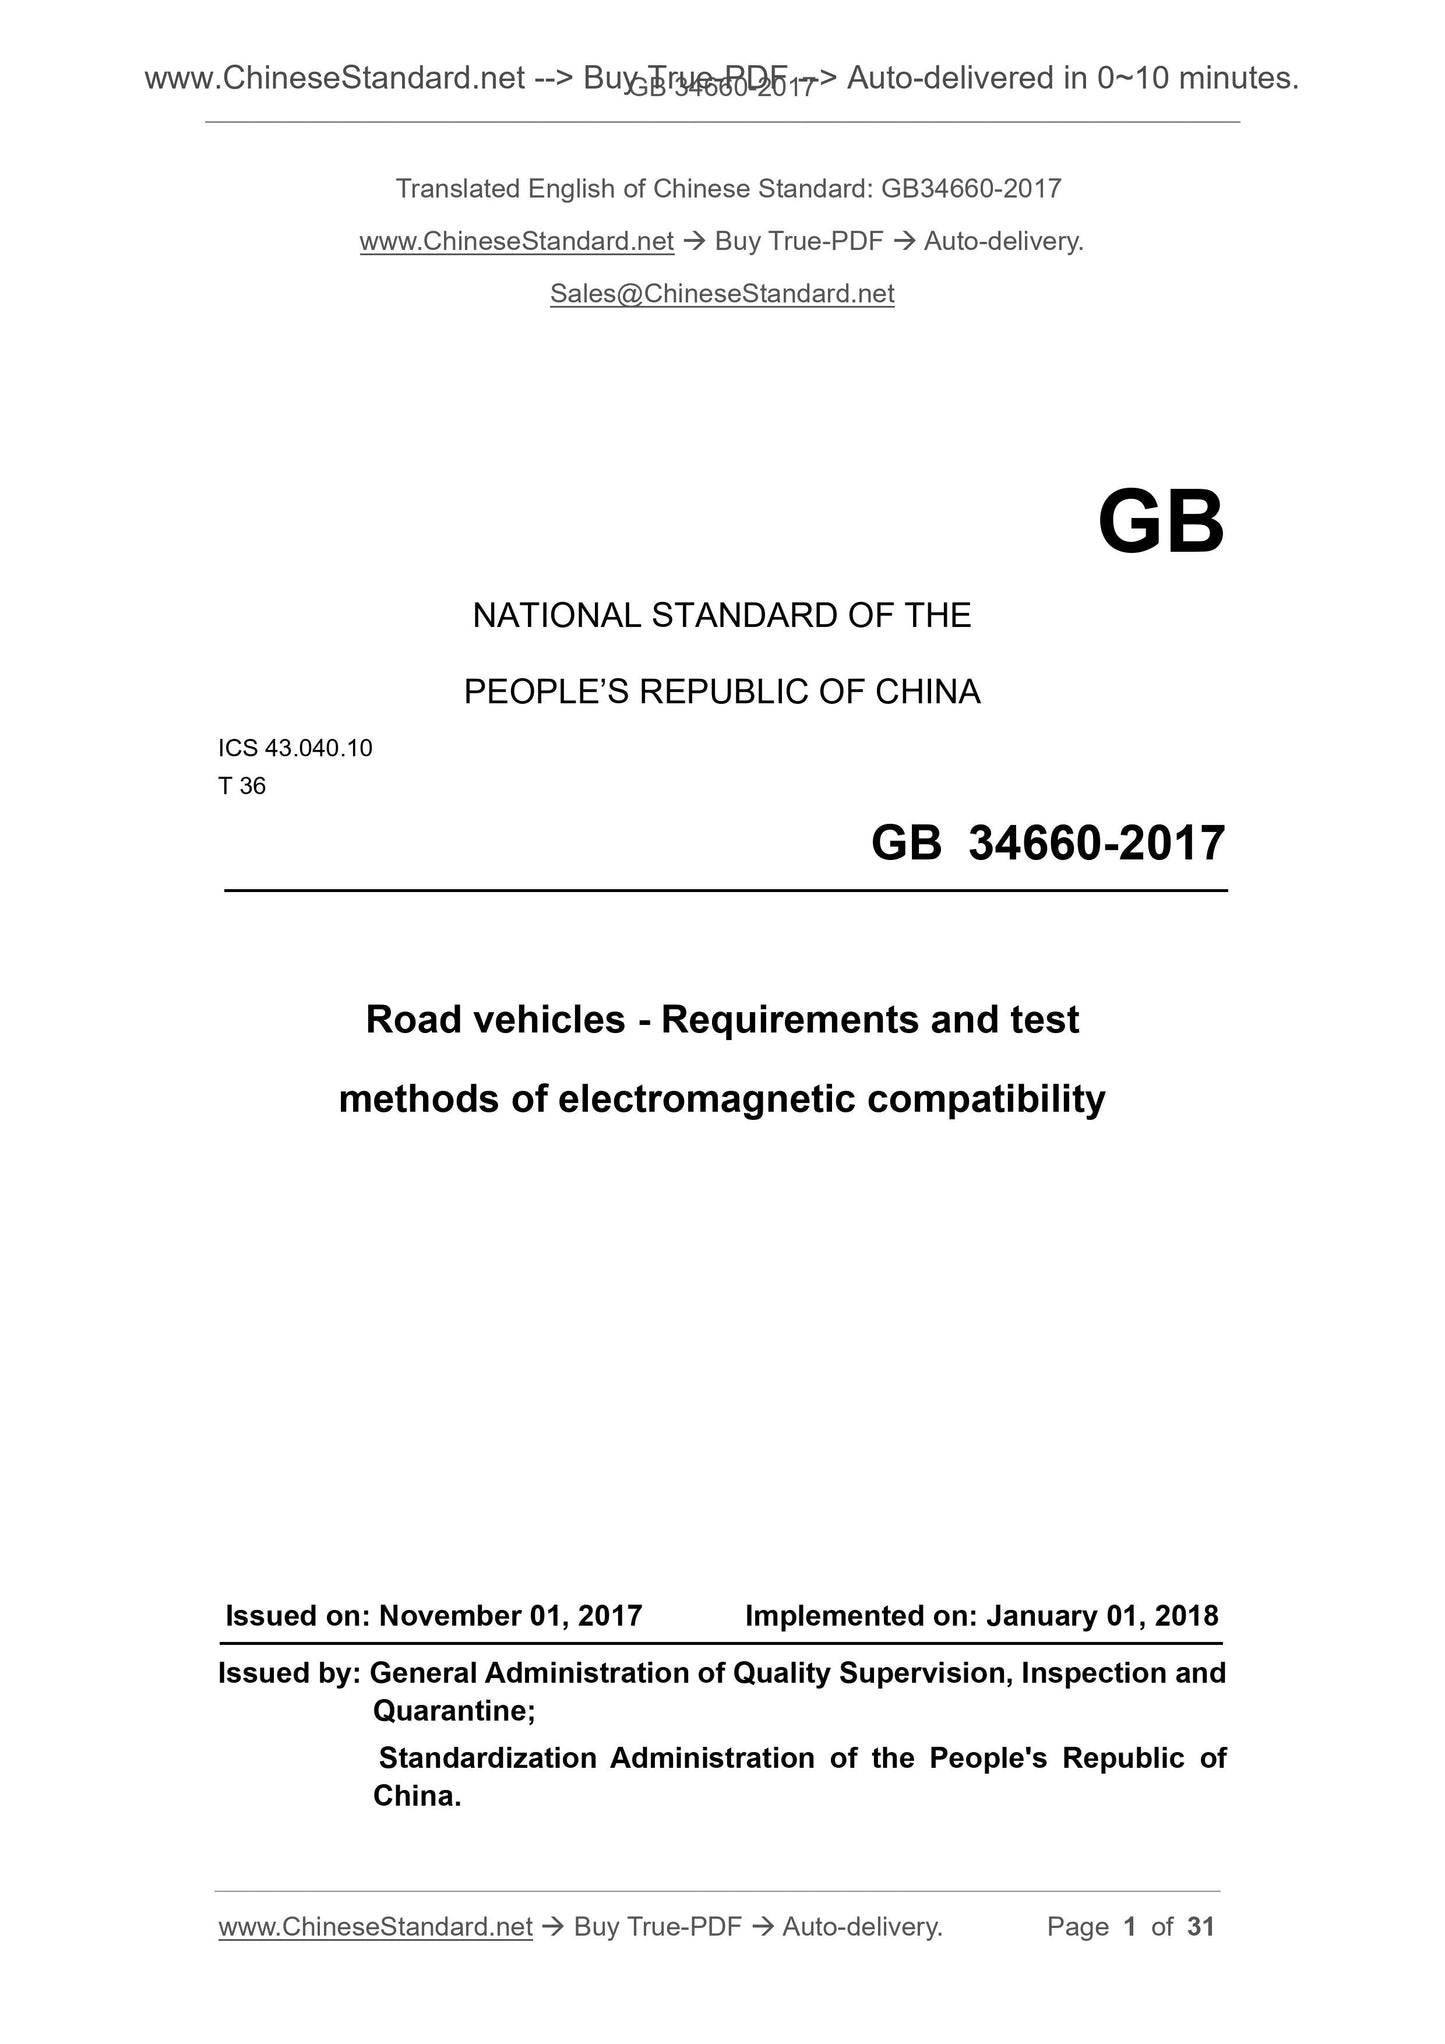 GB 34660-2017 Page 1